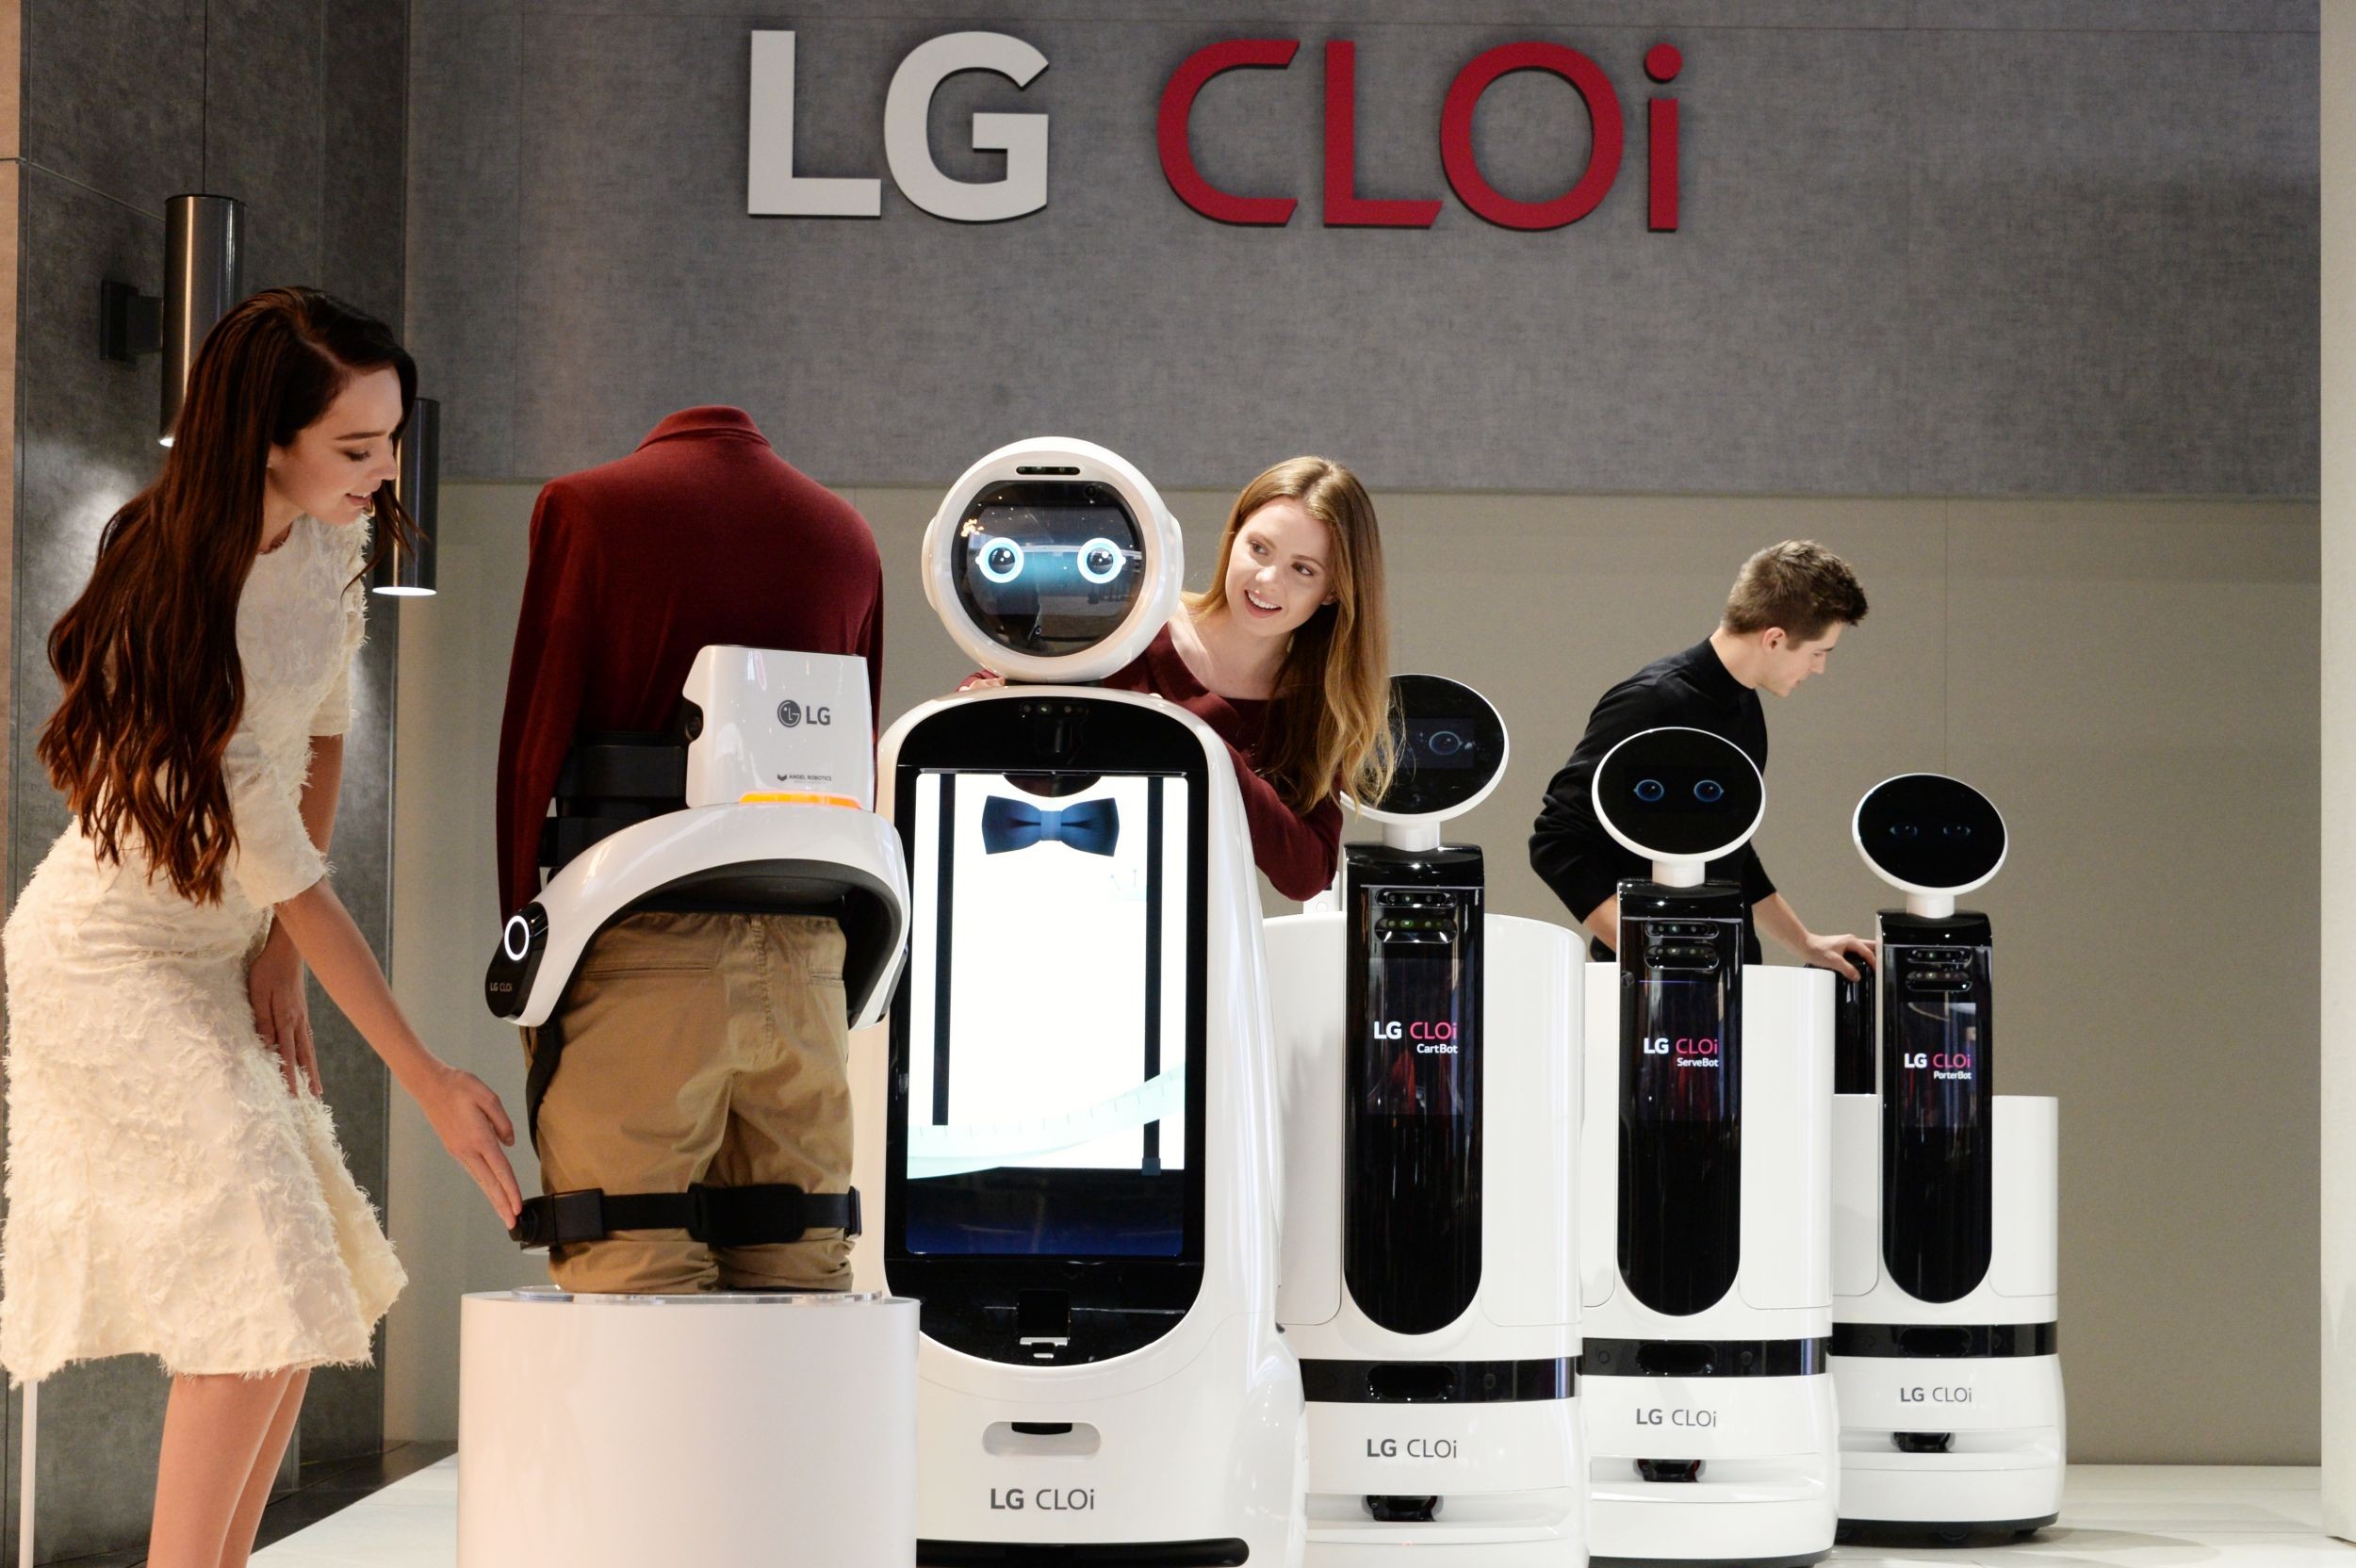 Female and male models look around the LG’s CLOi commercial robot samples.